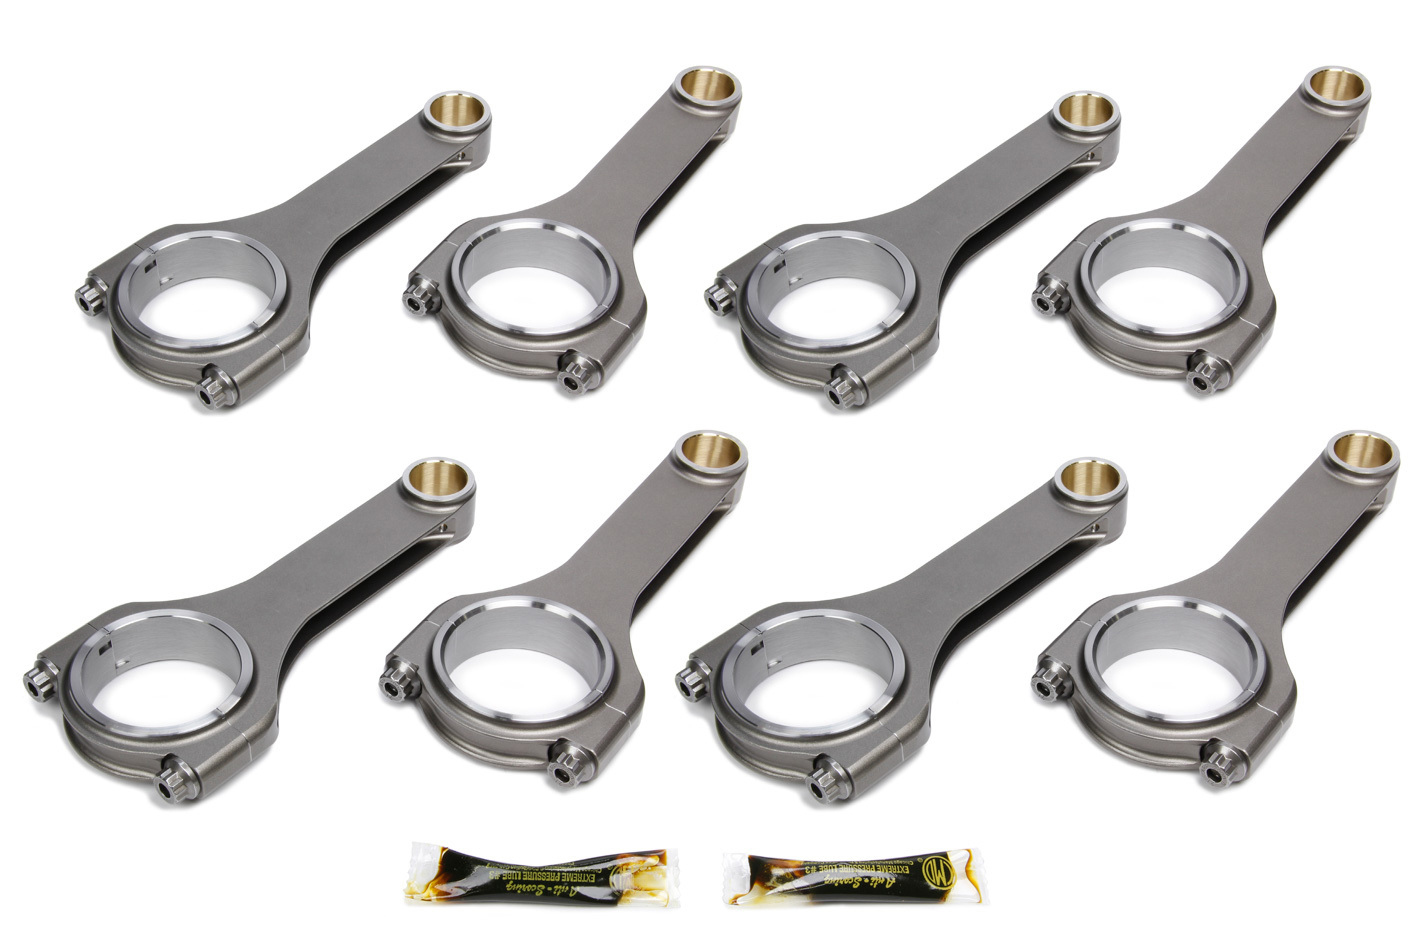 Dyers Rods 6000NLSBCLJ7200AD - Connecting Rod, Ultra Light Series, H-Beam, 6.000 in Long, Bushed, 7/16 in Cap Screws, Forged Steel, Small Block Chevy, Set of 8